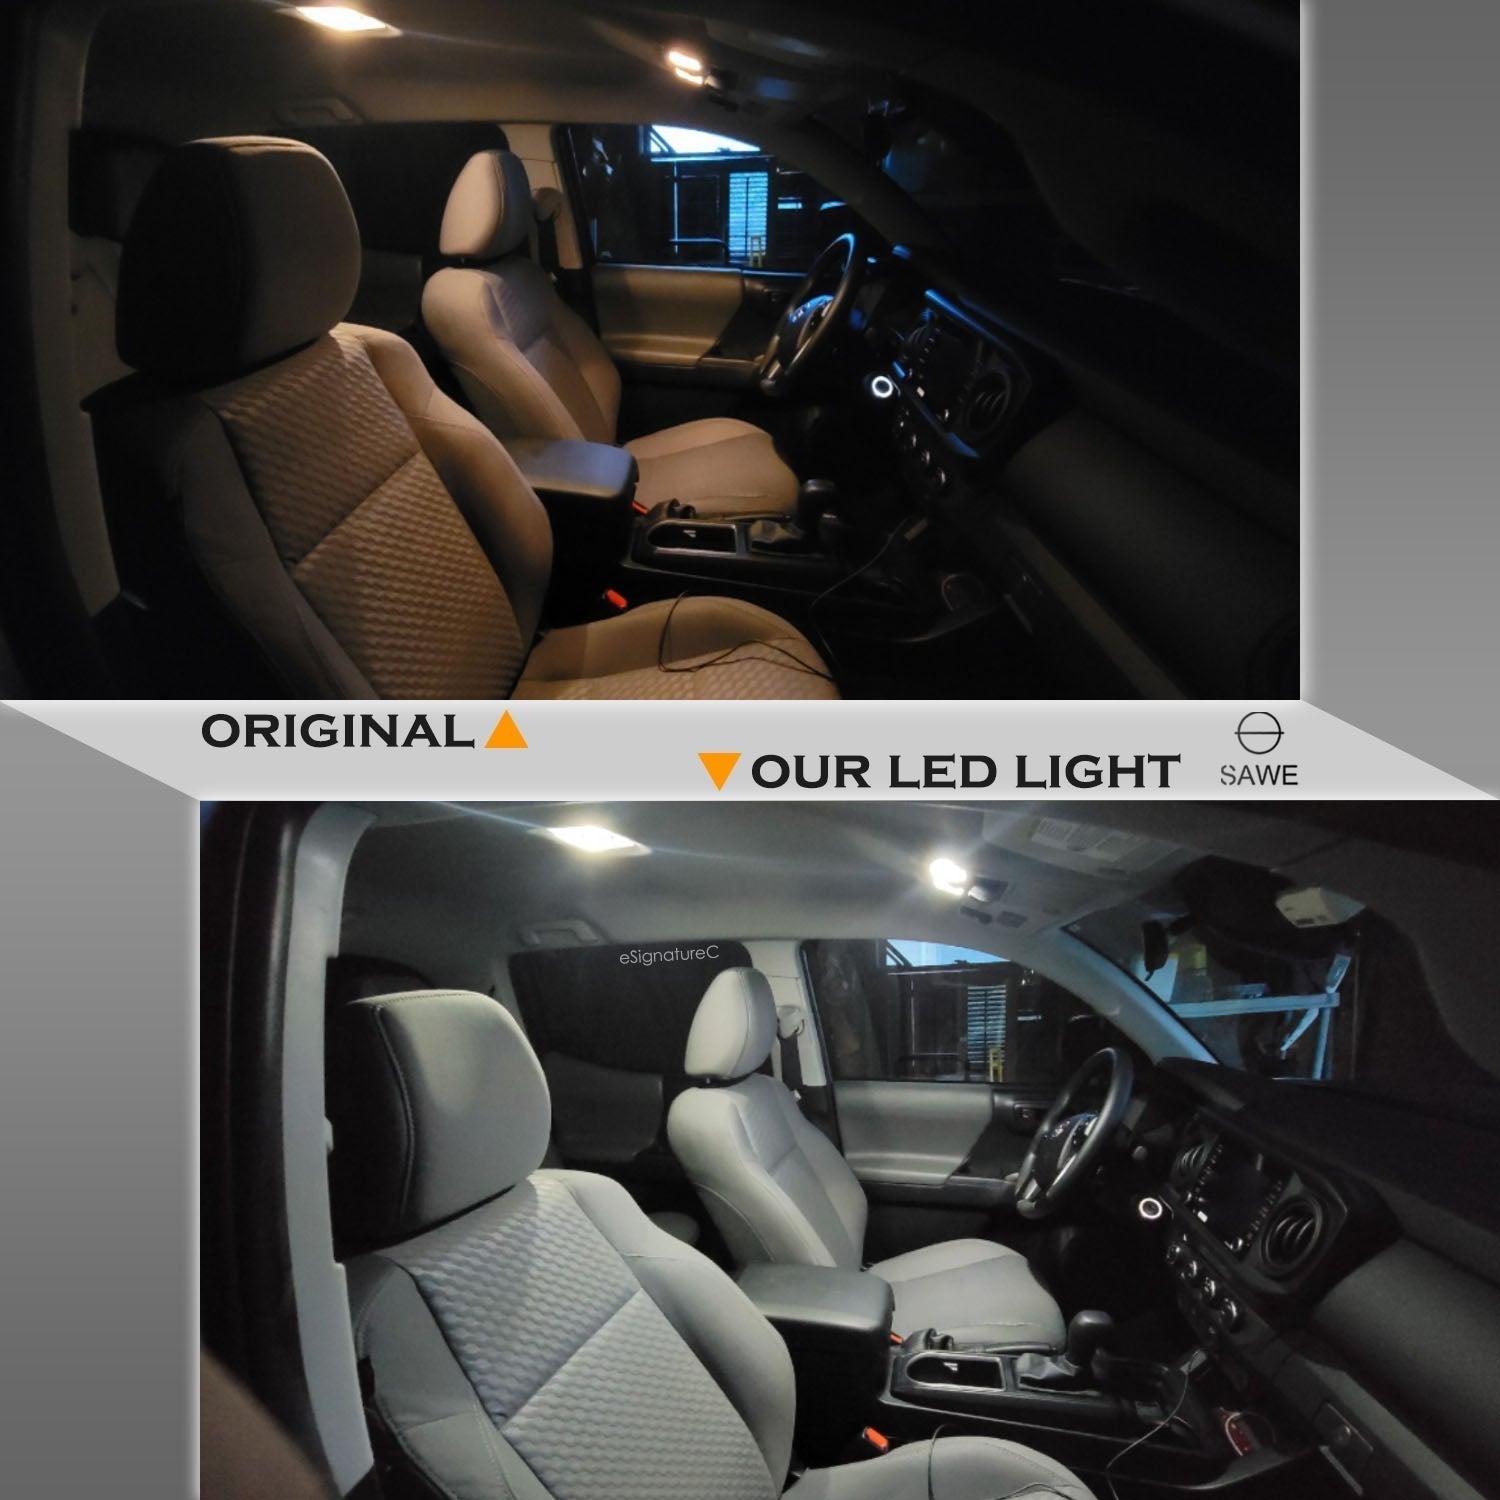 For Chevrolet Colorado Interior LED Lights - Dome & Map Lights Package Kit for 2004 - 2012 - White